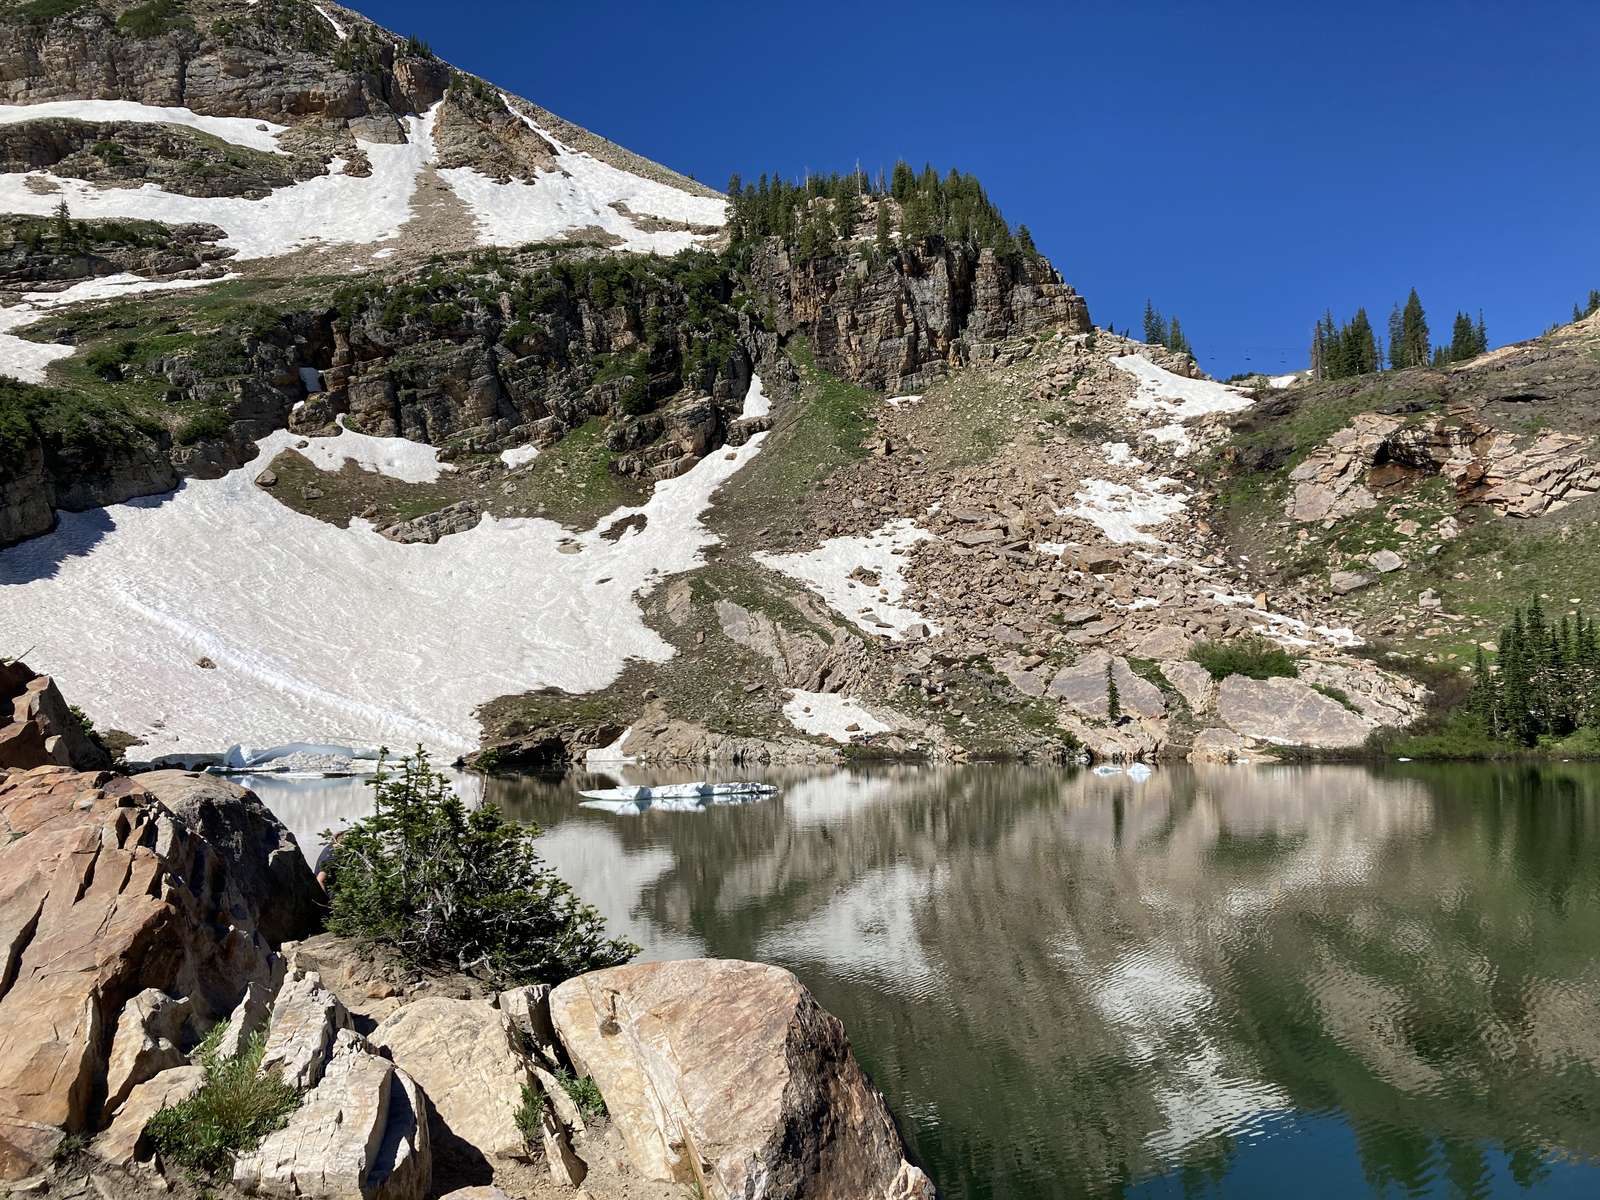 Cecret Lake puzzle online from photo